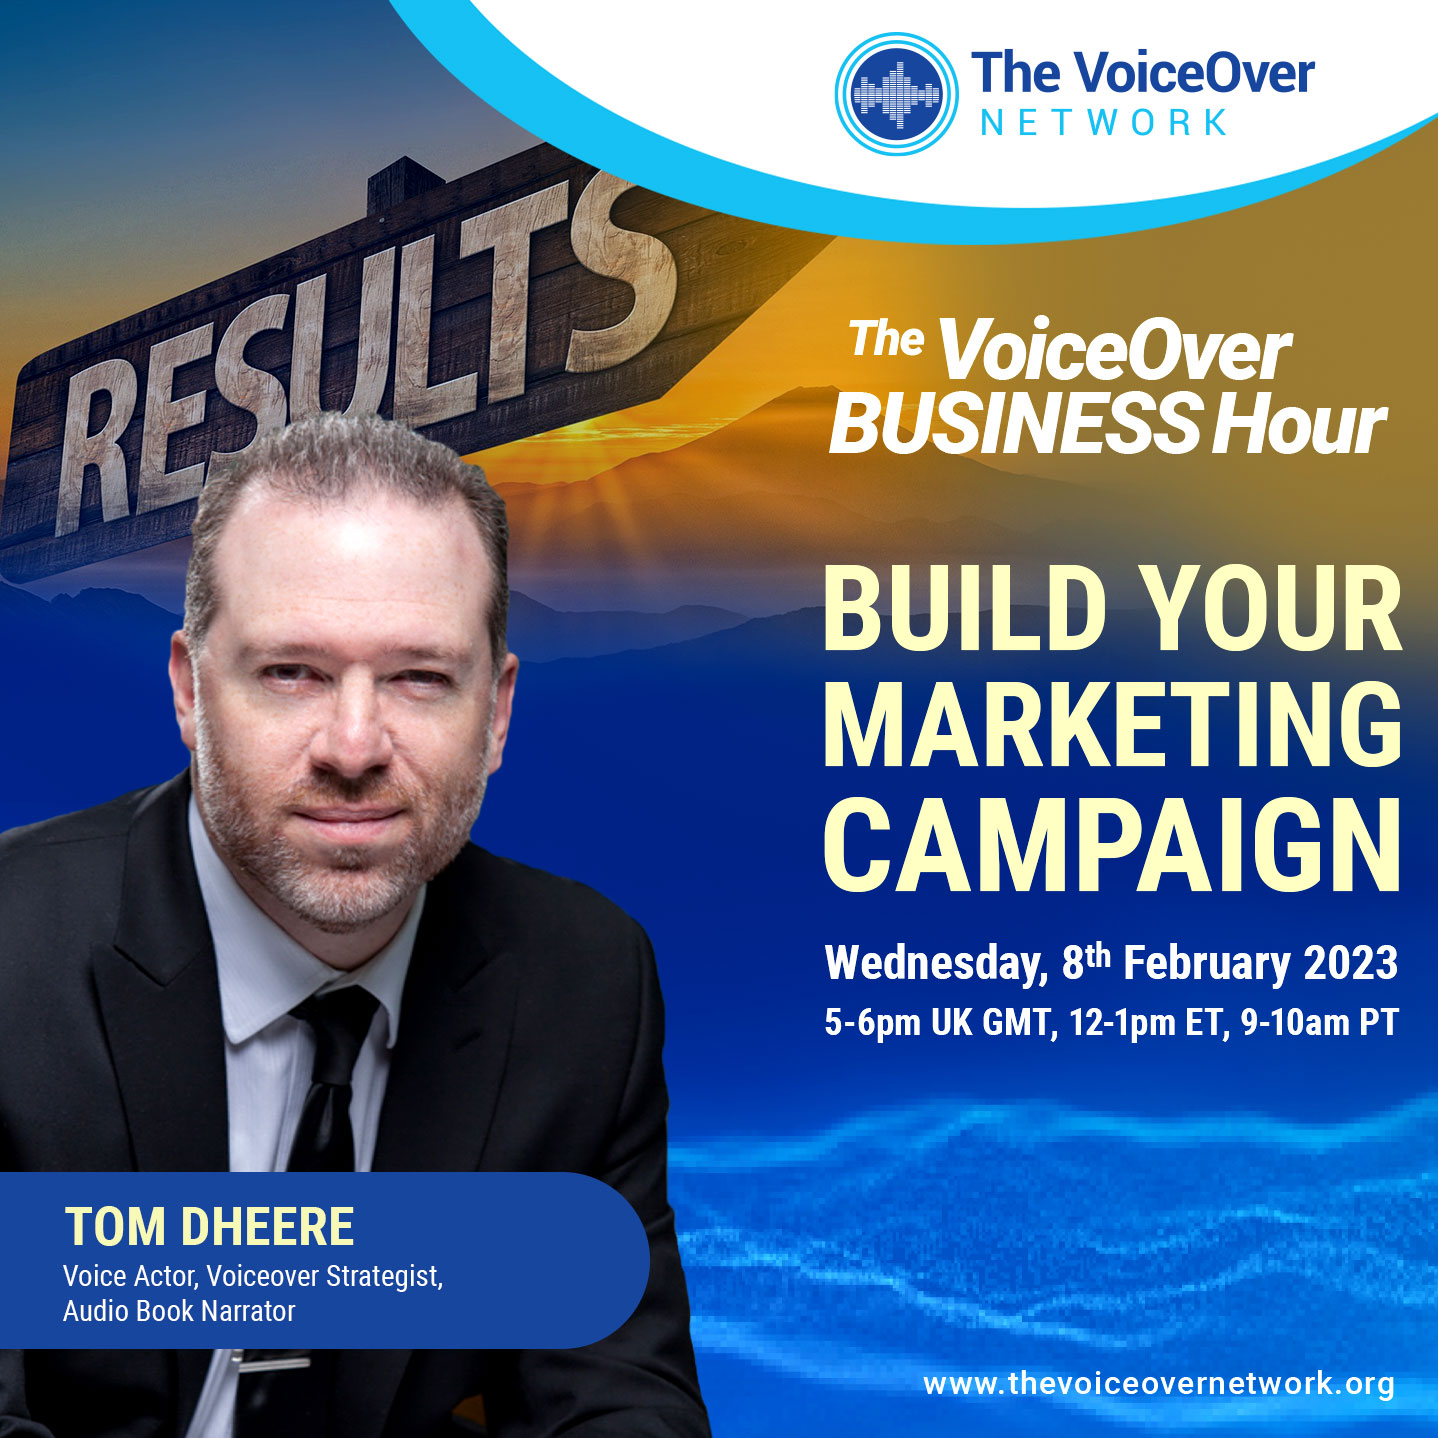 The VoiceOver Business Hour - ‘Build Your Marketing Campaign’ with Tom Dheere